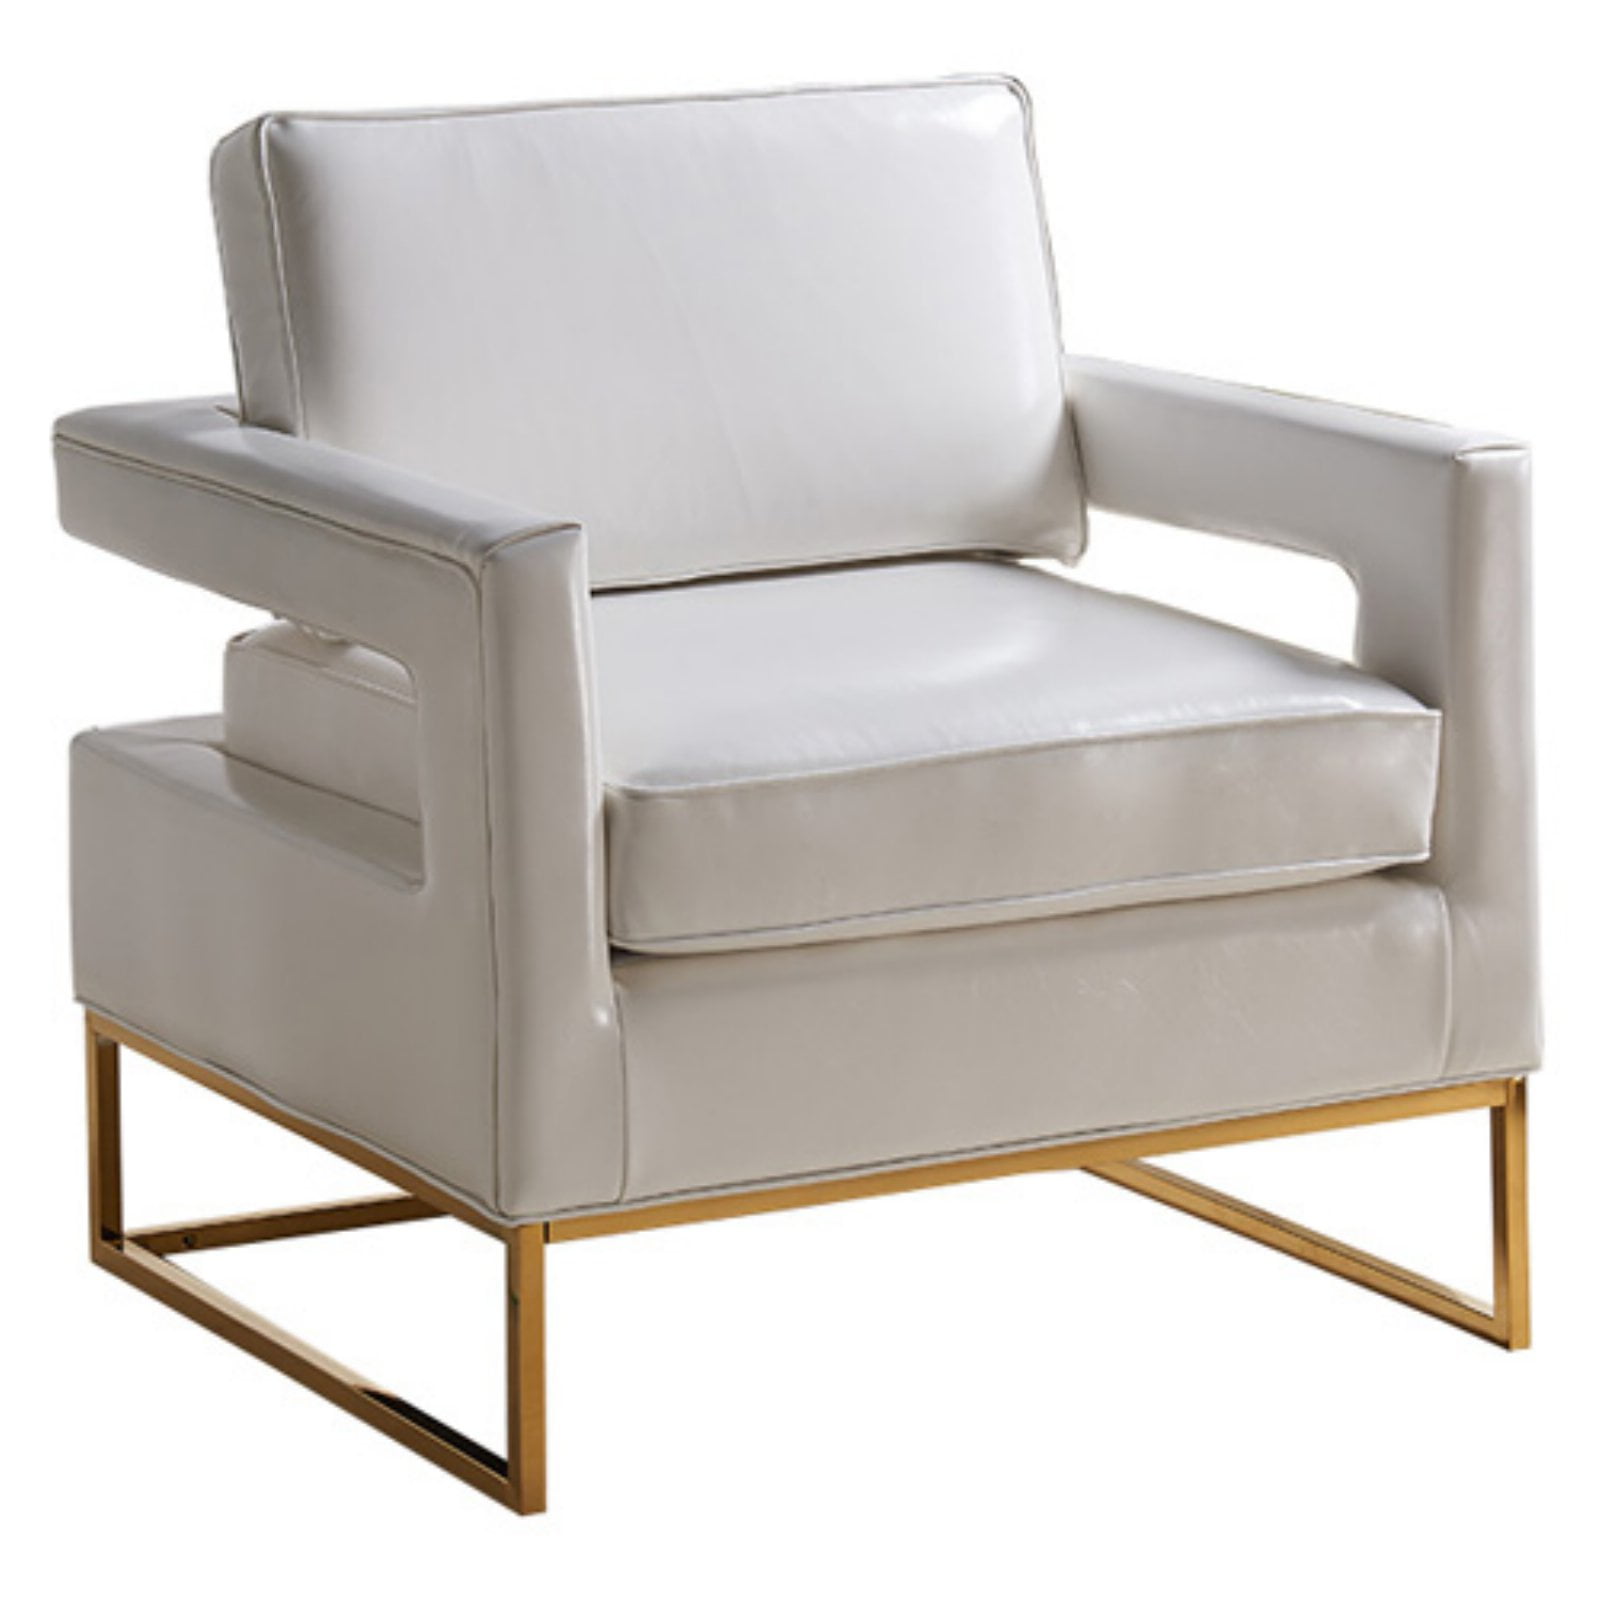 Amelia White Leather Accent Chair - Walmart.com